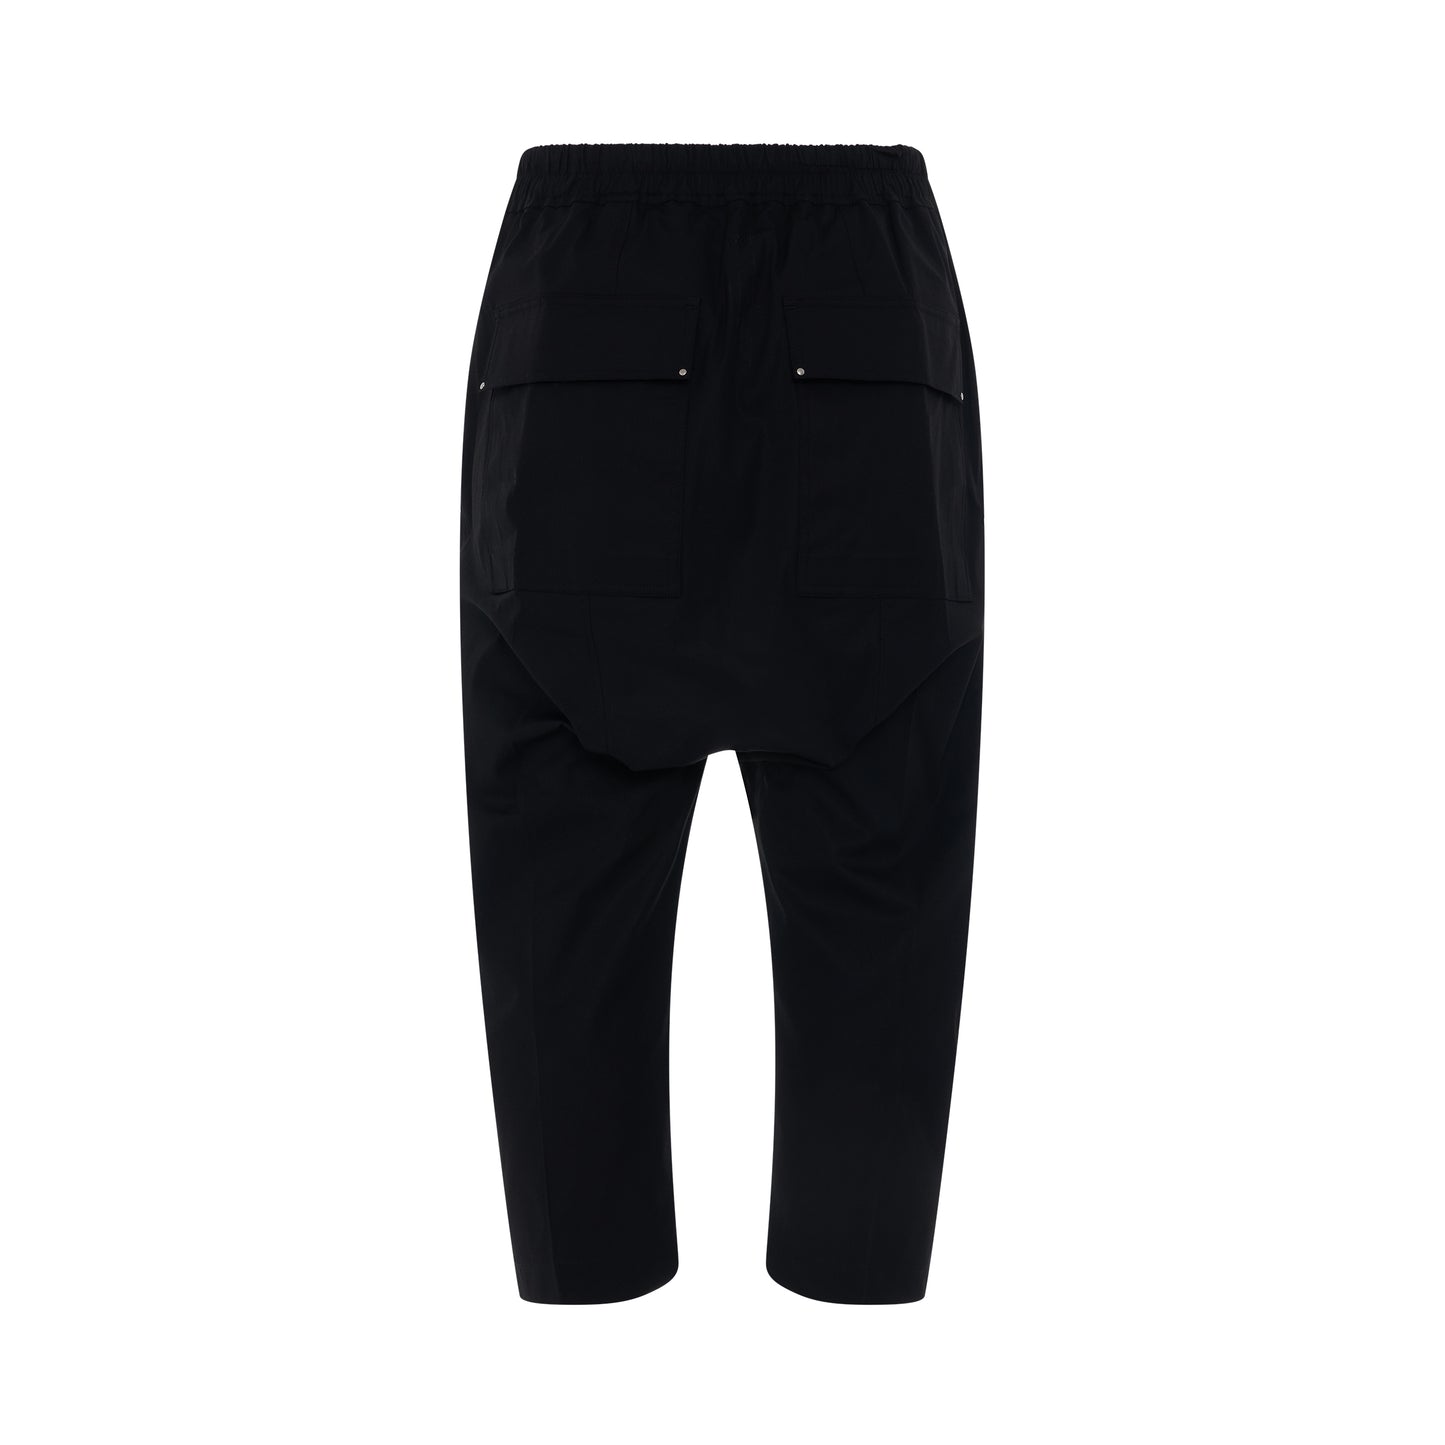 Woven Drawstring Cropped Pants in Black